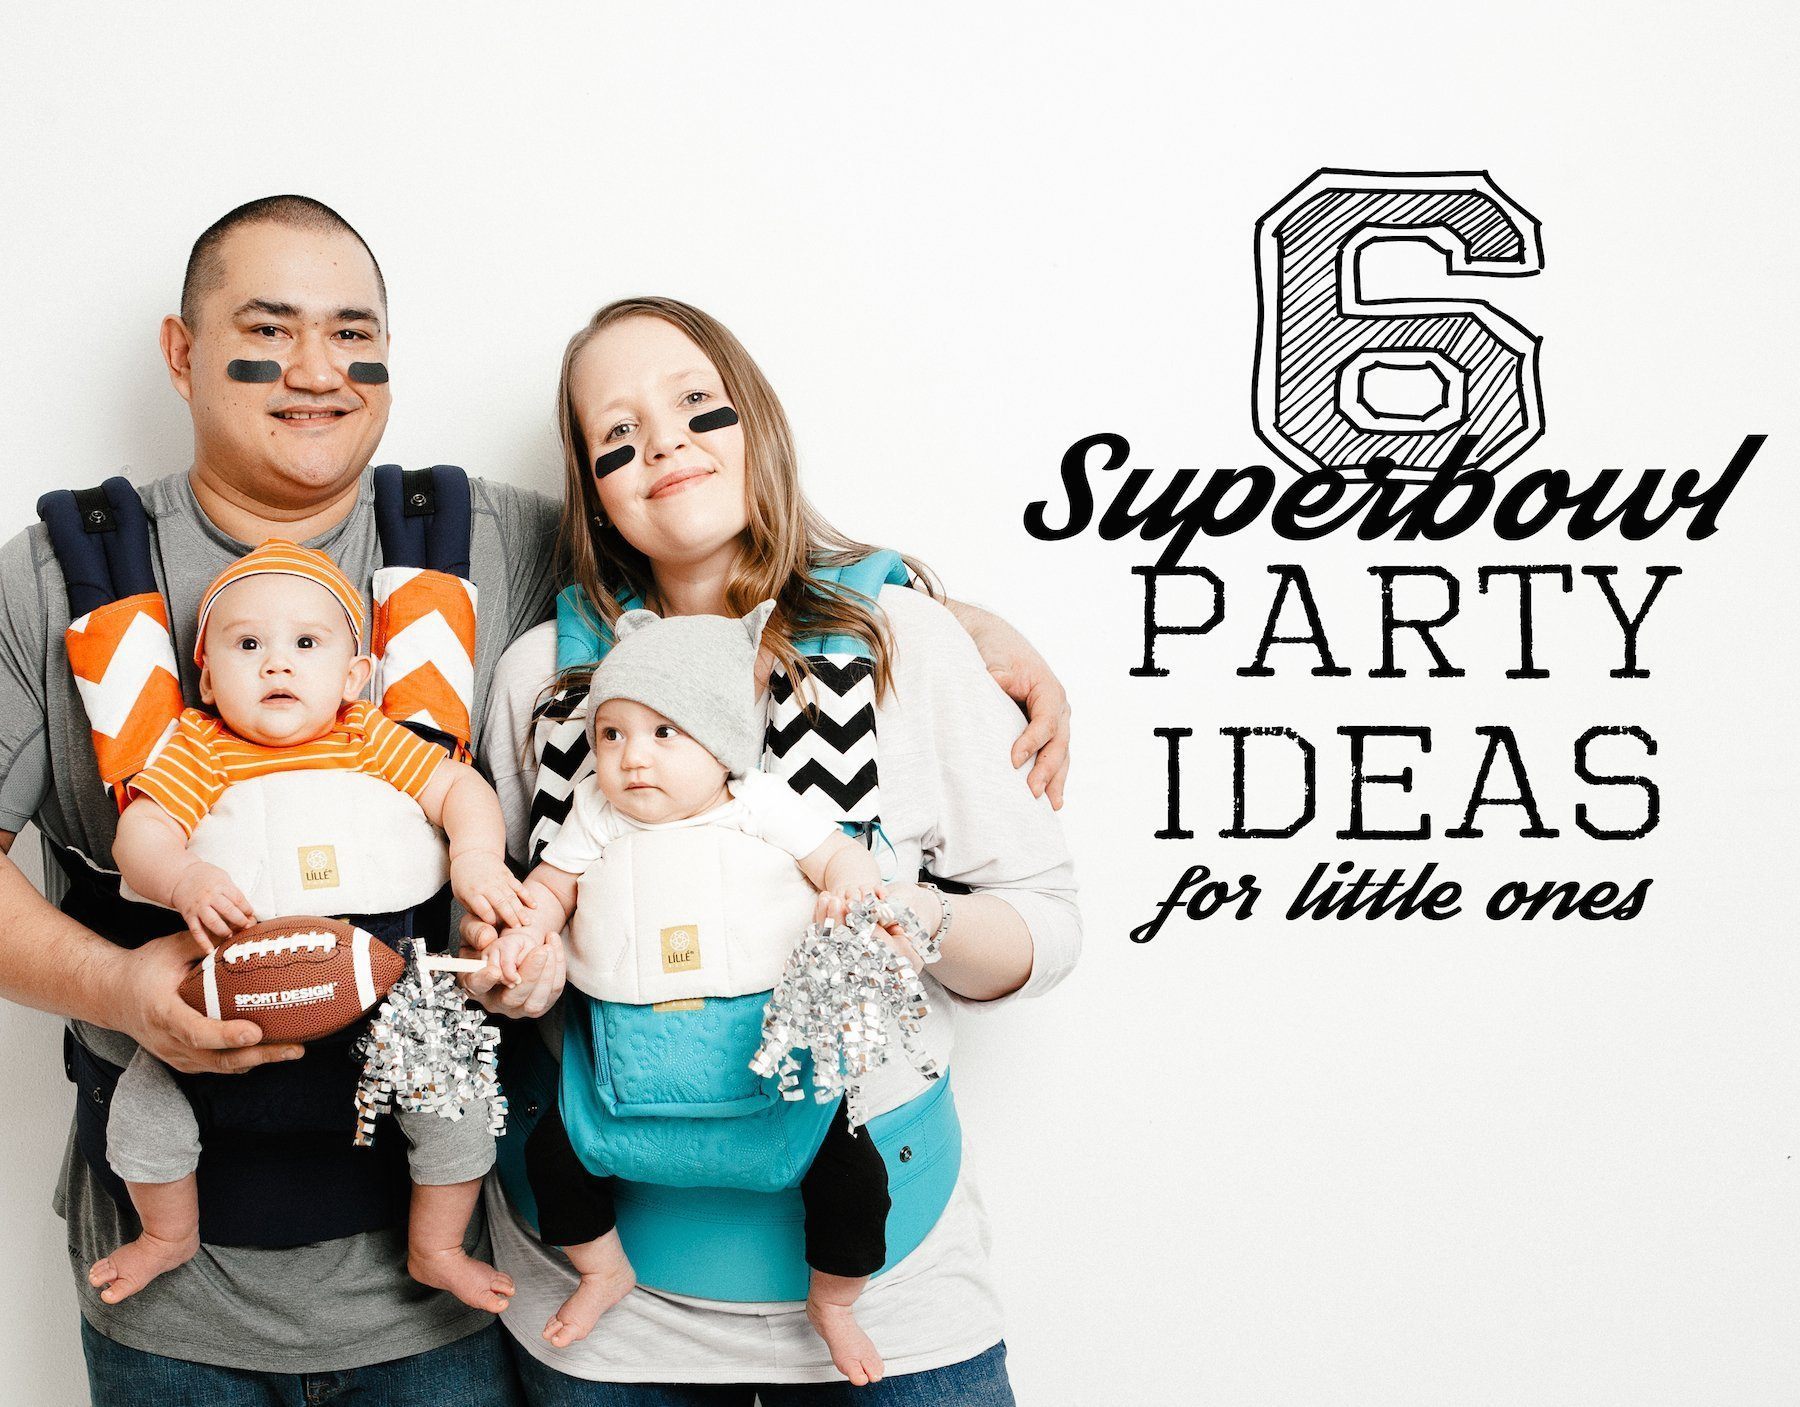 6 Superbowl Party Ideas for Little Ones